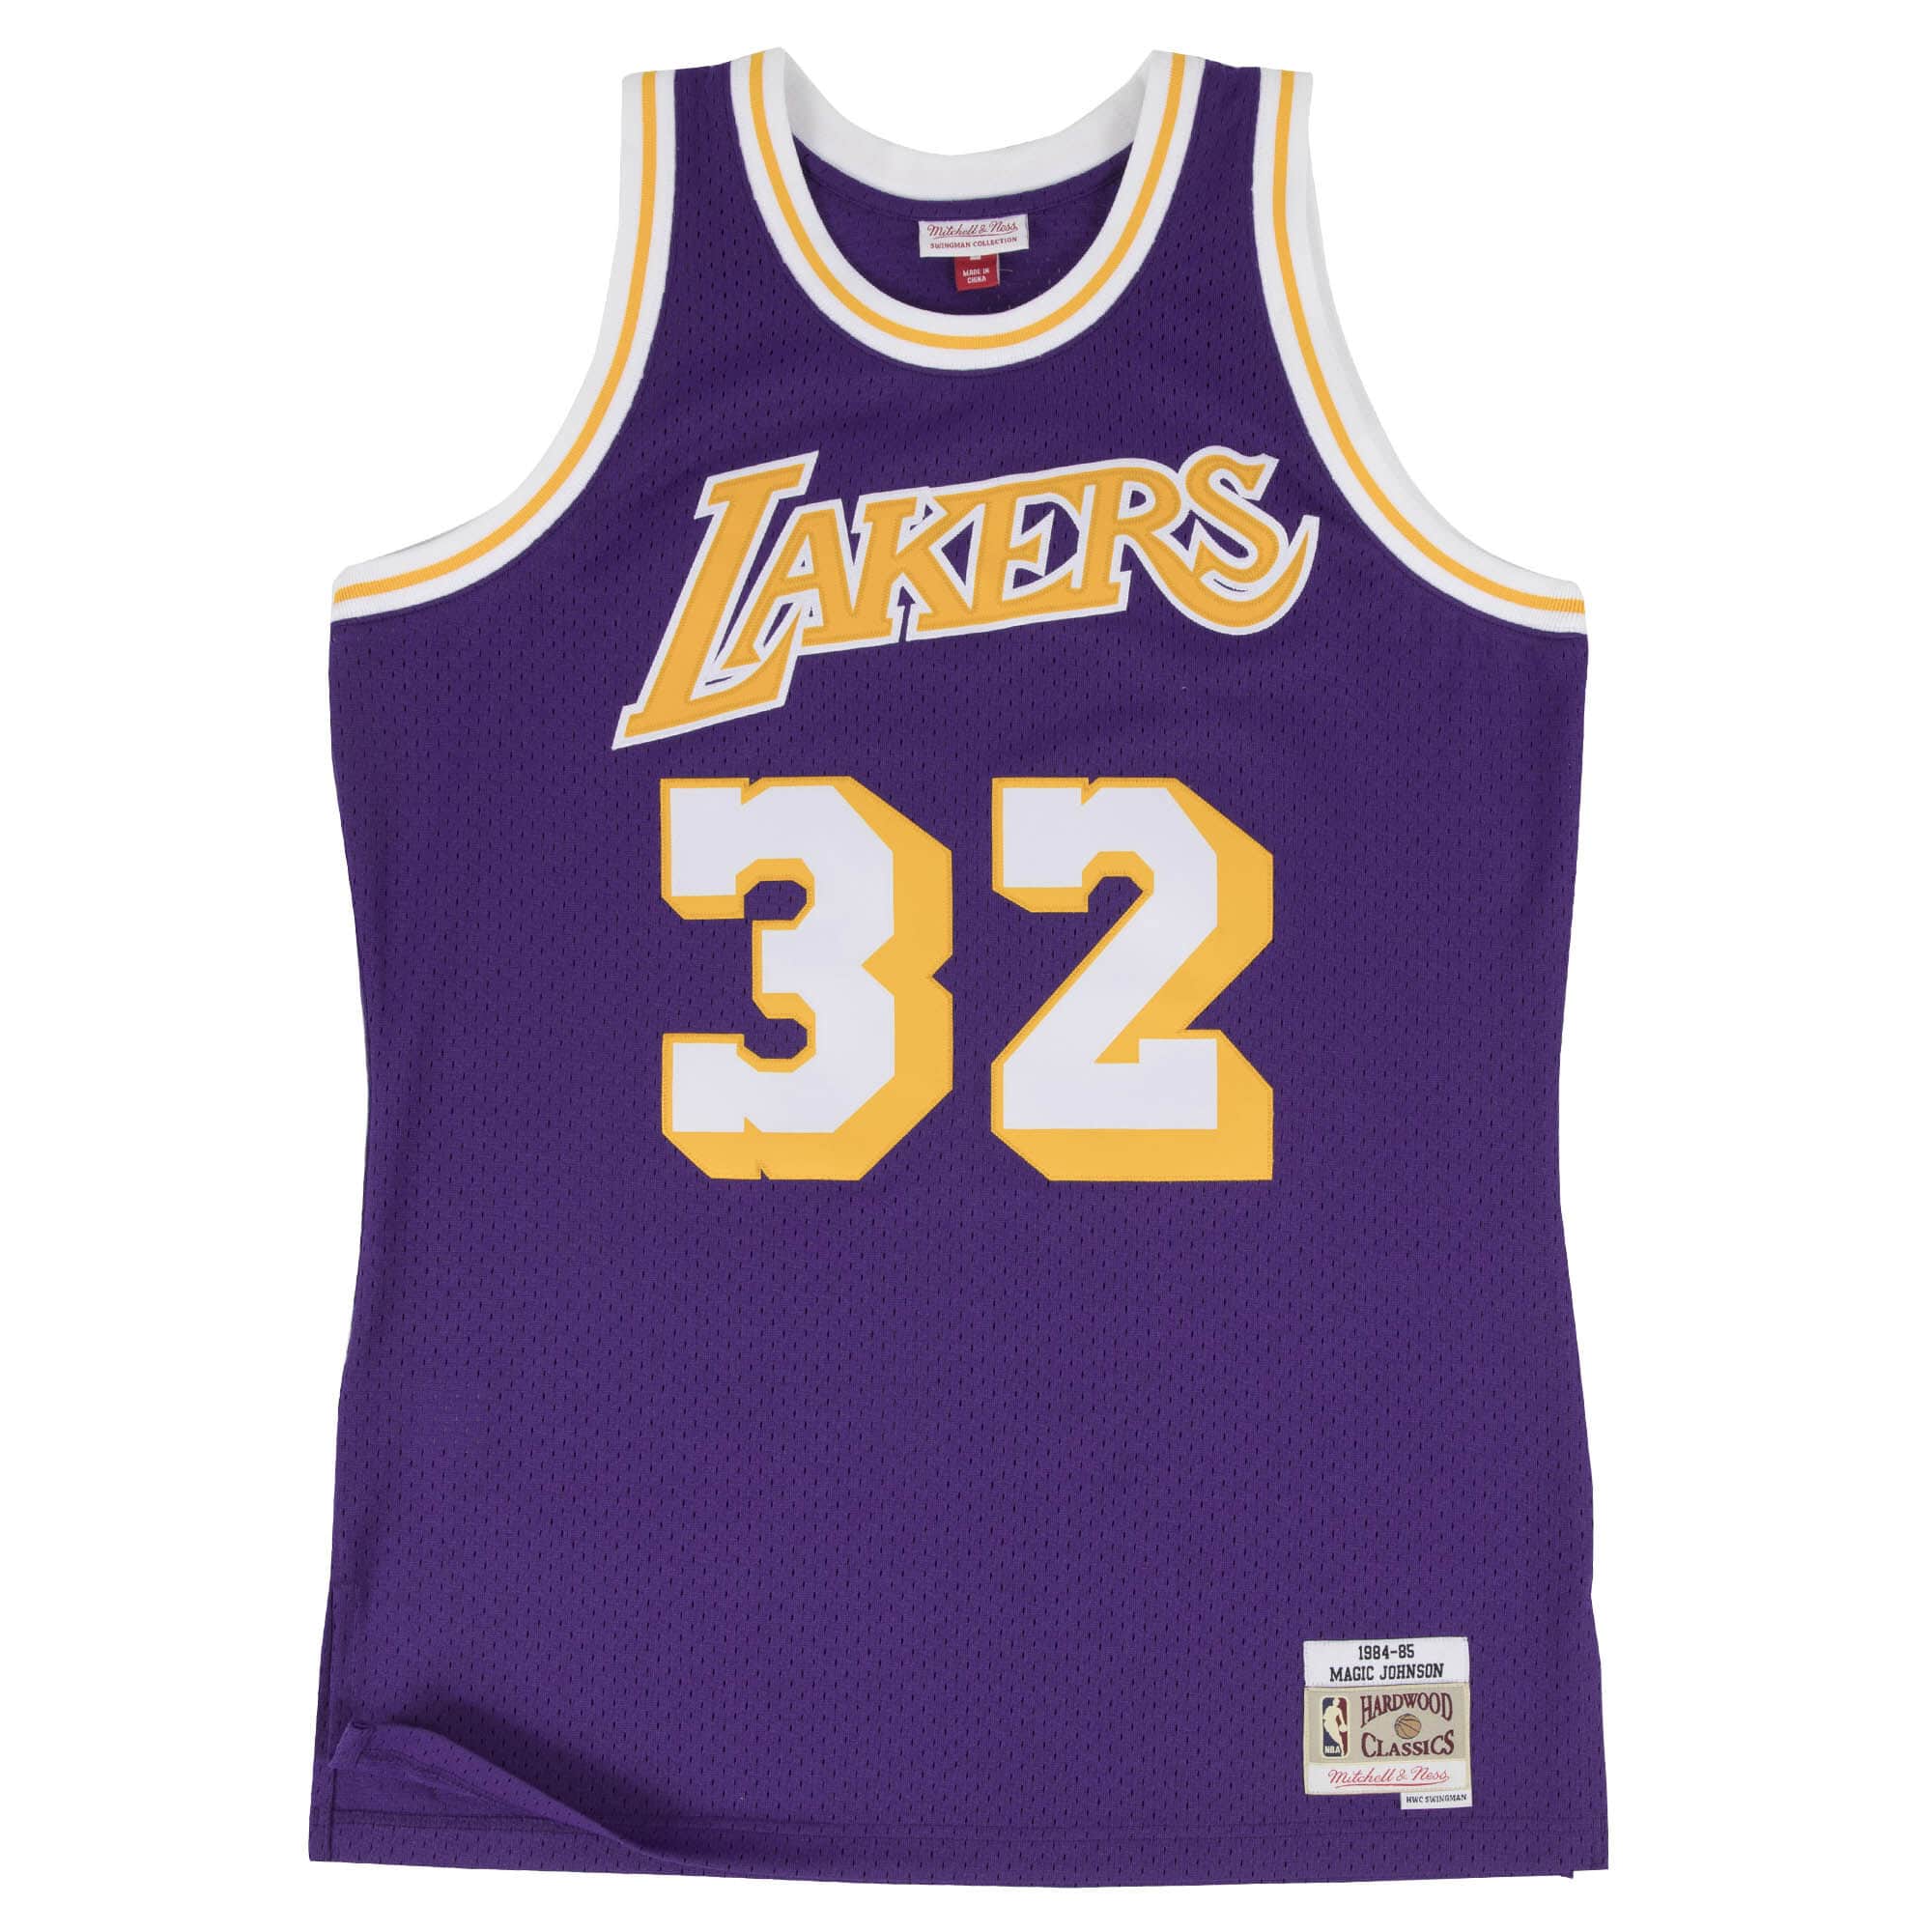 Official Los Angeles Lakers Jerseys, Lakers Jersey, Lakers Basketball  Jerseys